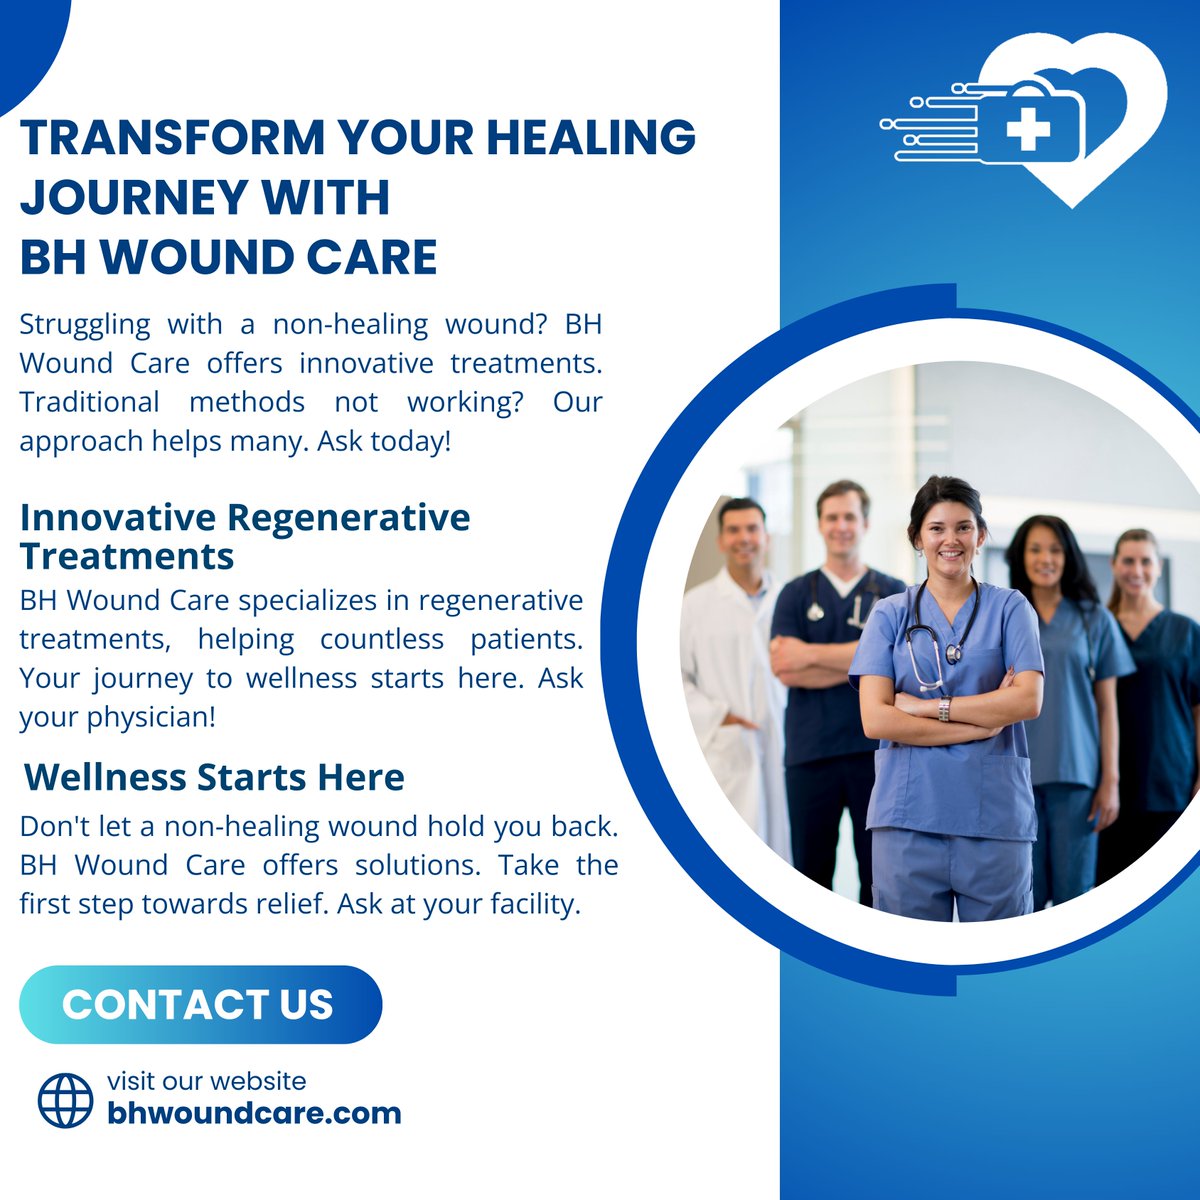 Experience transformative healing with BH Wound Care. Specializing in regenerative treatments, we offer hope when traditional methods fall short. Start your journey to wellness today! #WoundCare #RegenerativeHealing #BHWC